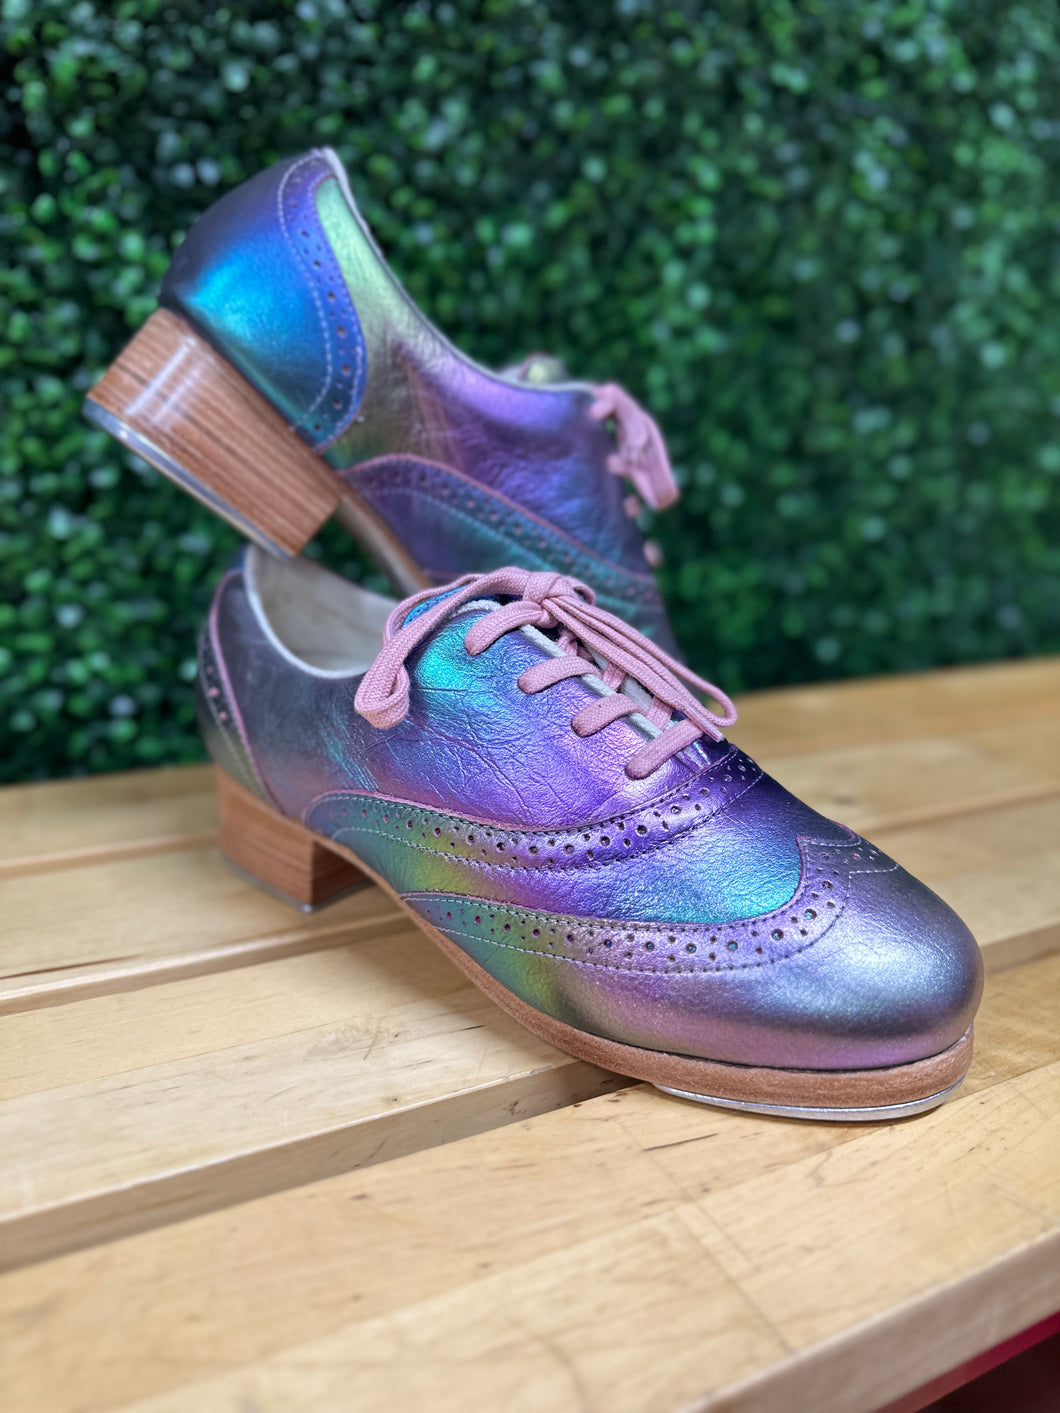 Limited Edition Iridescent Roxy Tap Shoes